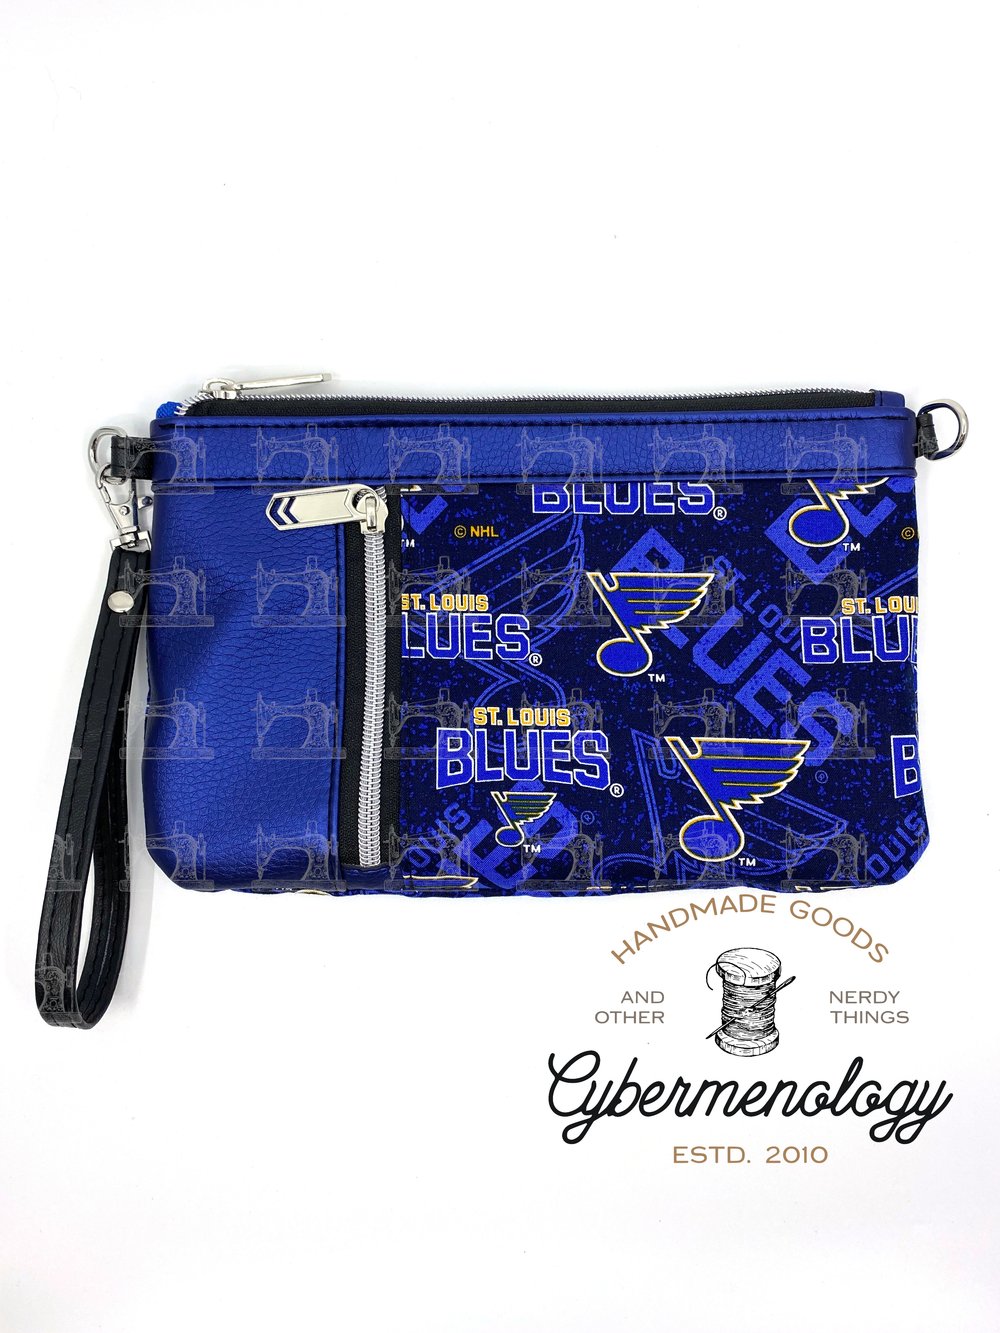 St Louis Blues Hockey Clutch Wristlet — Cybermenology - Handmade Goods and  Other Nerdy Things